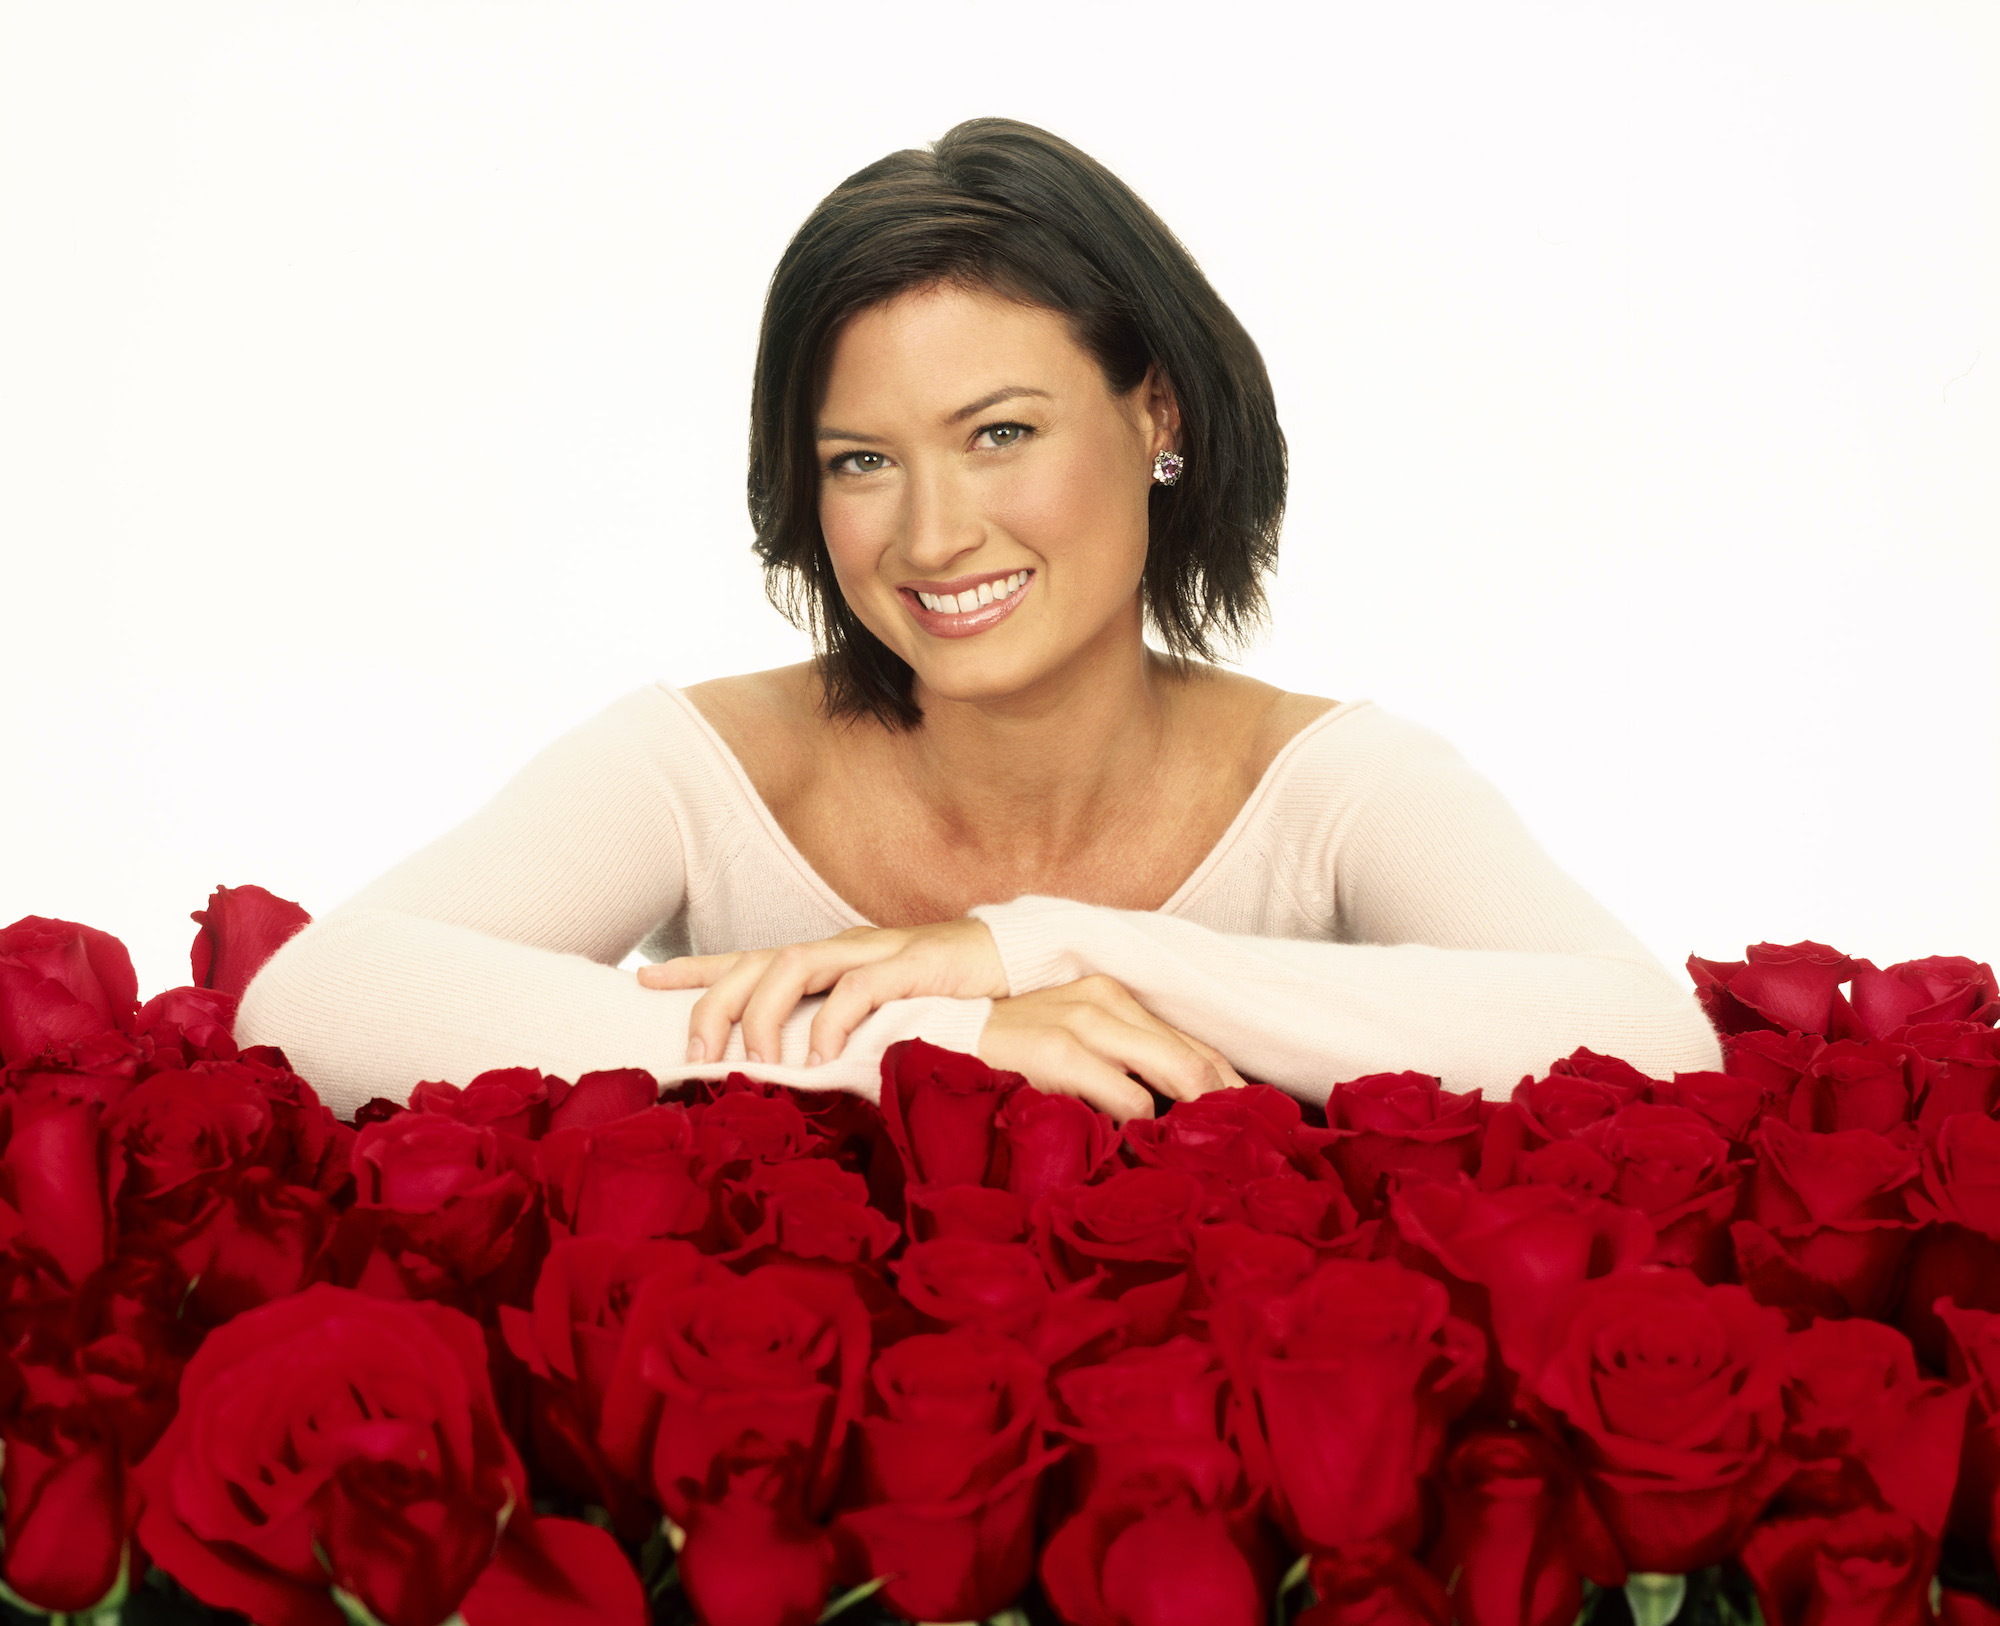 Meredith Phillips smiling, leaning over roses